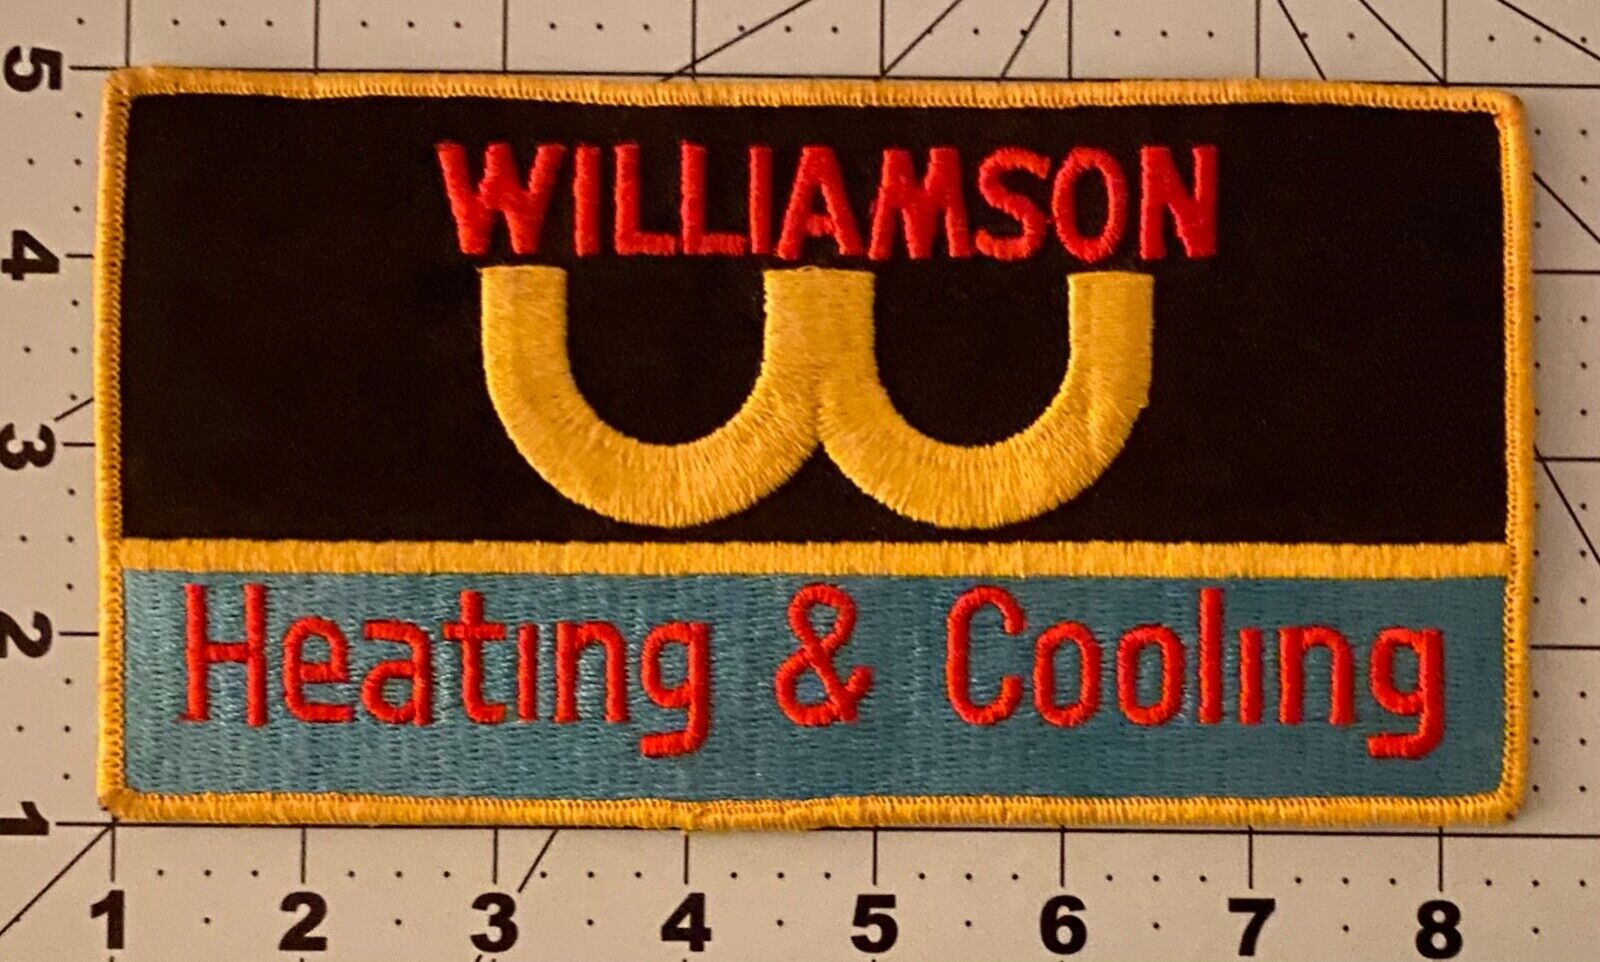 WILLIAMSON HEATING & COOLING Clear Lake Indiana Large Embroidered Back Patch